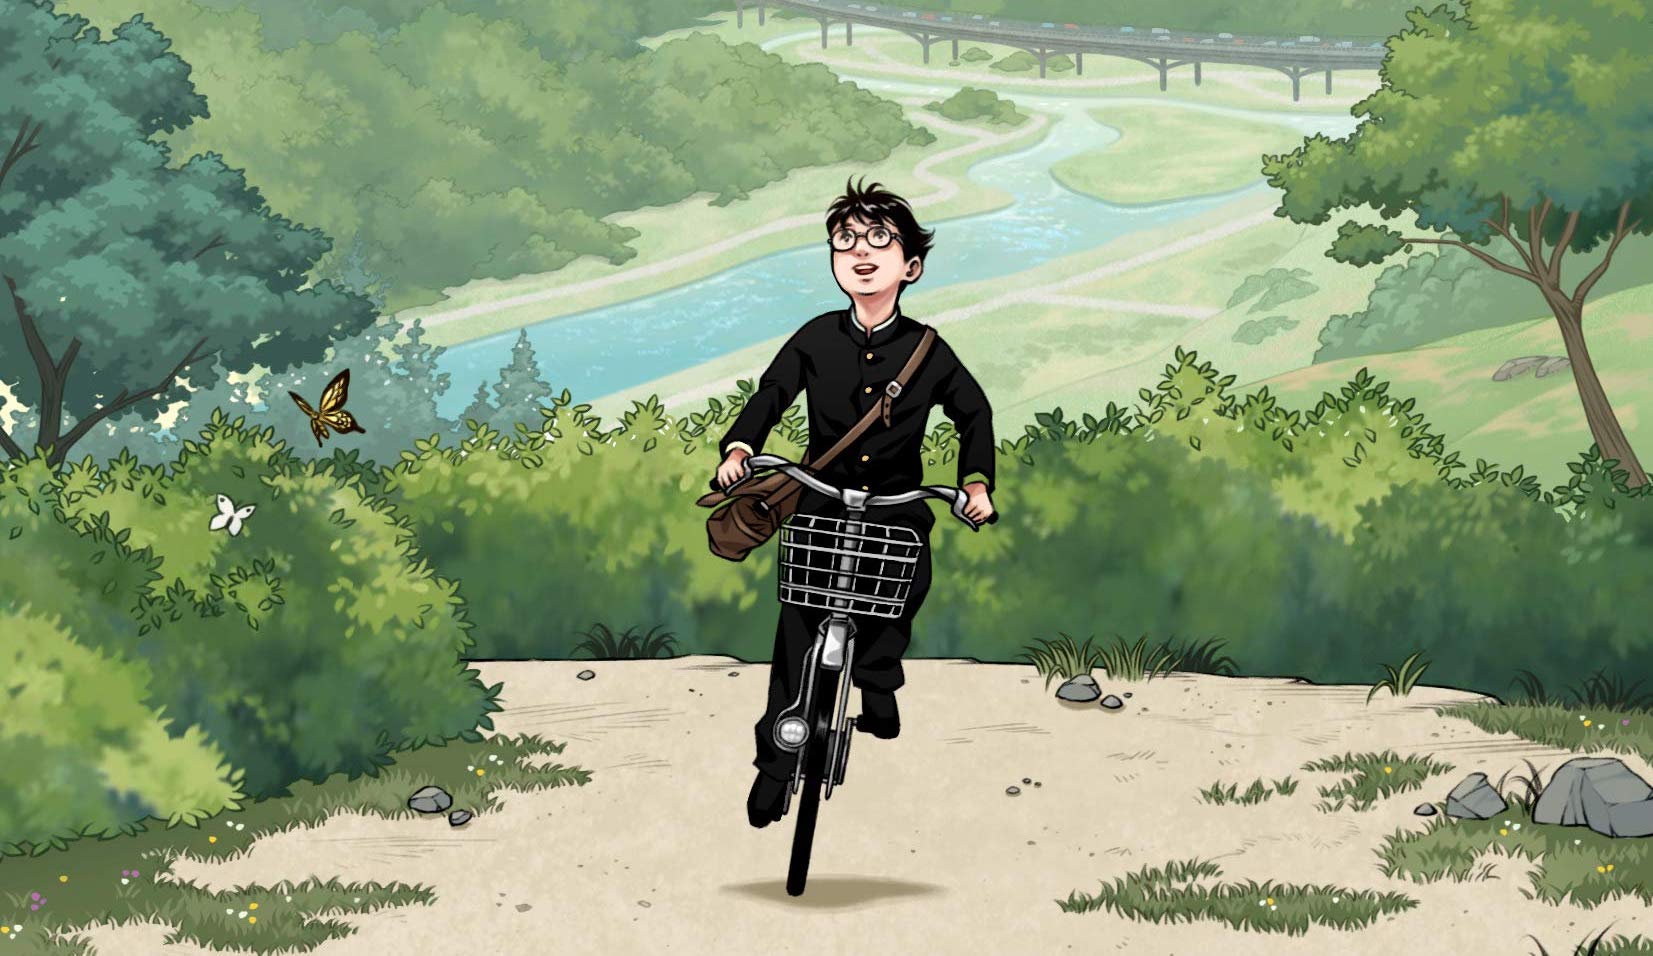 A detail from an American book cover for Genzaburō Yoshino’s children’s novel How Do You Live?, which inspired Hayao Miyazaki’s movie, shows a young boy in a black school uniform smiling as he bikes up a country hill, surrounded by greenery and with a river in the distant background